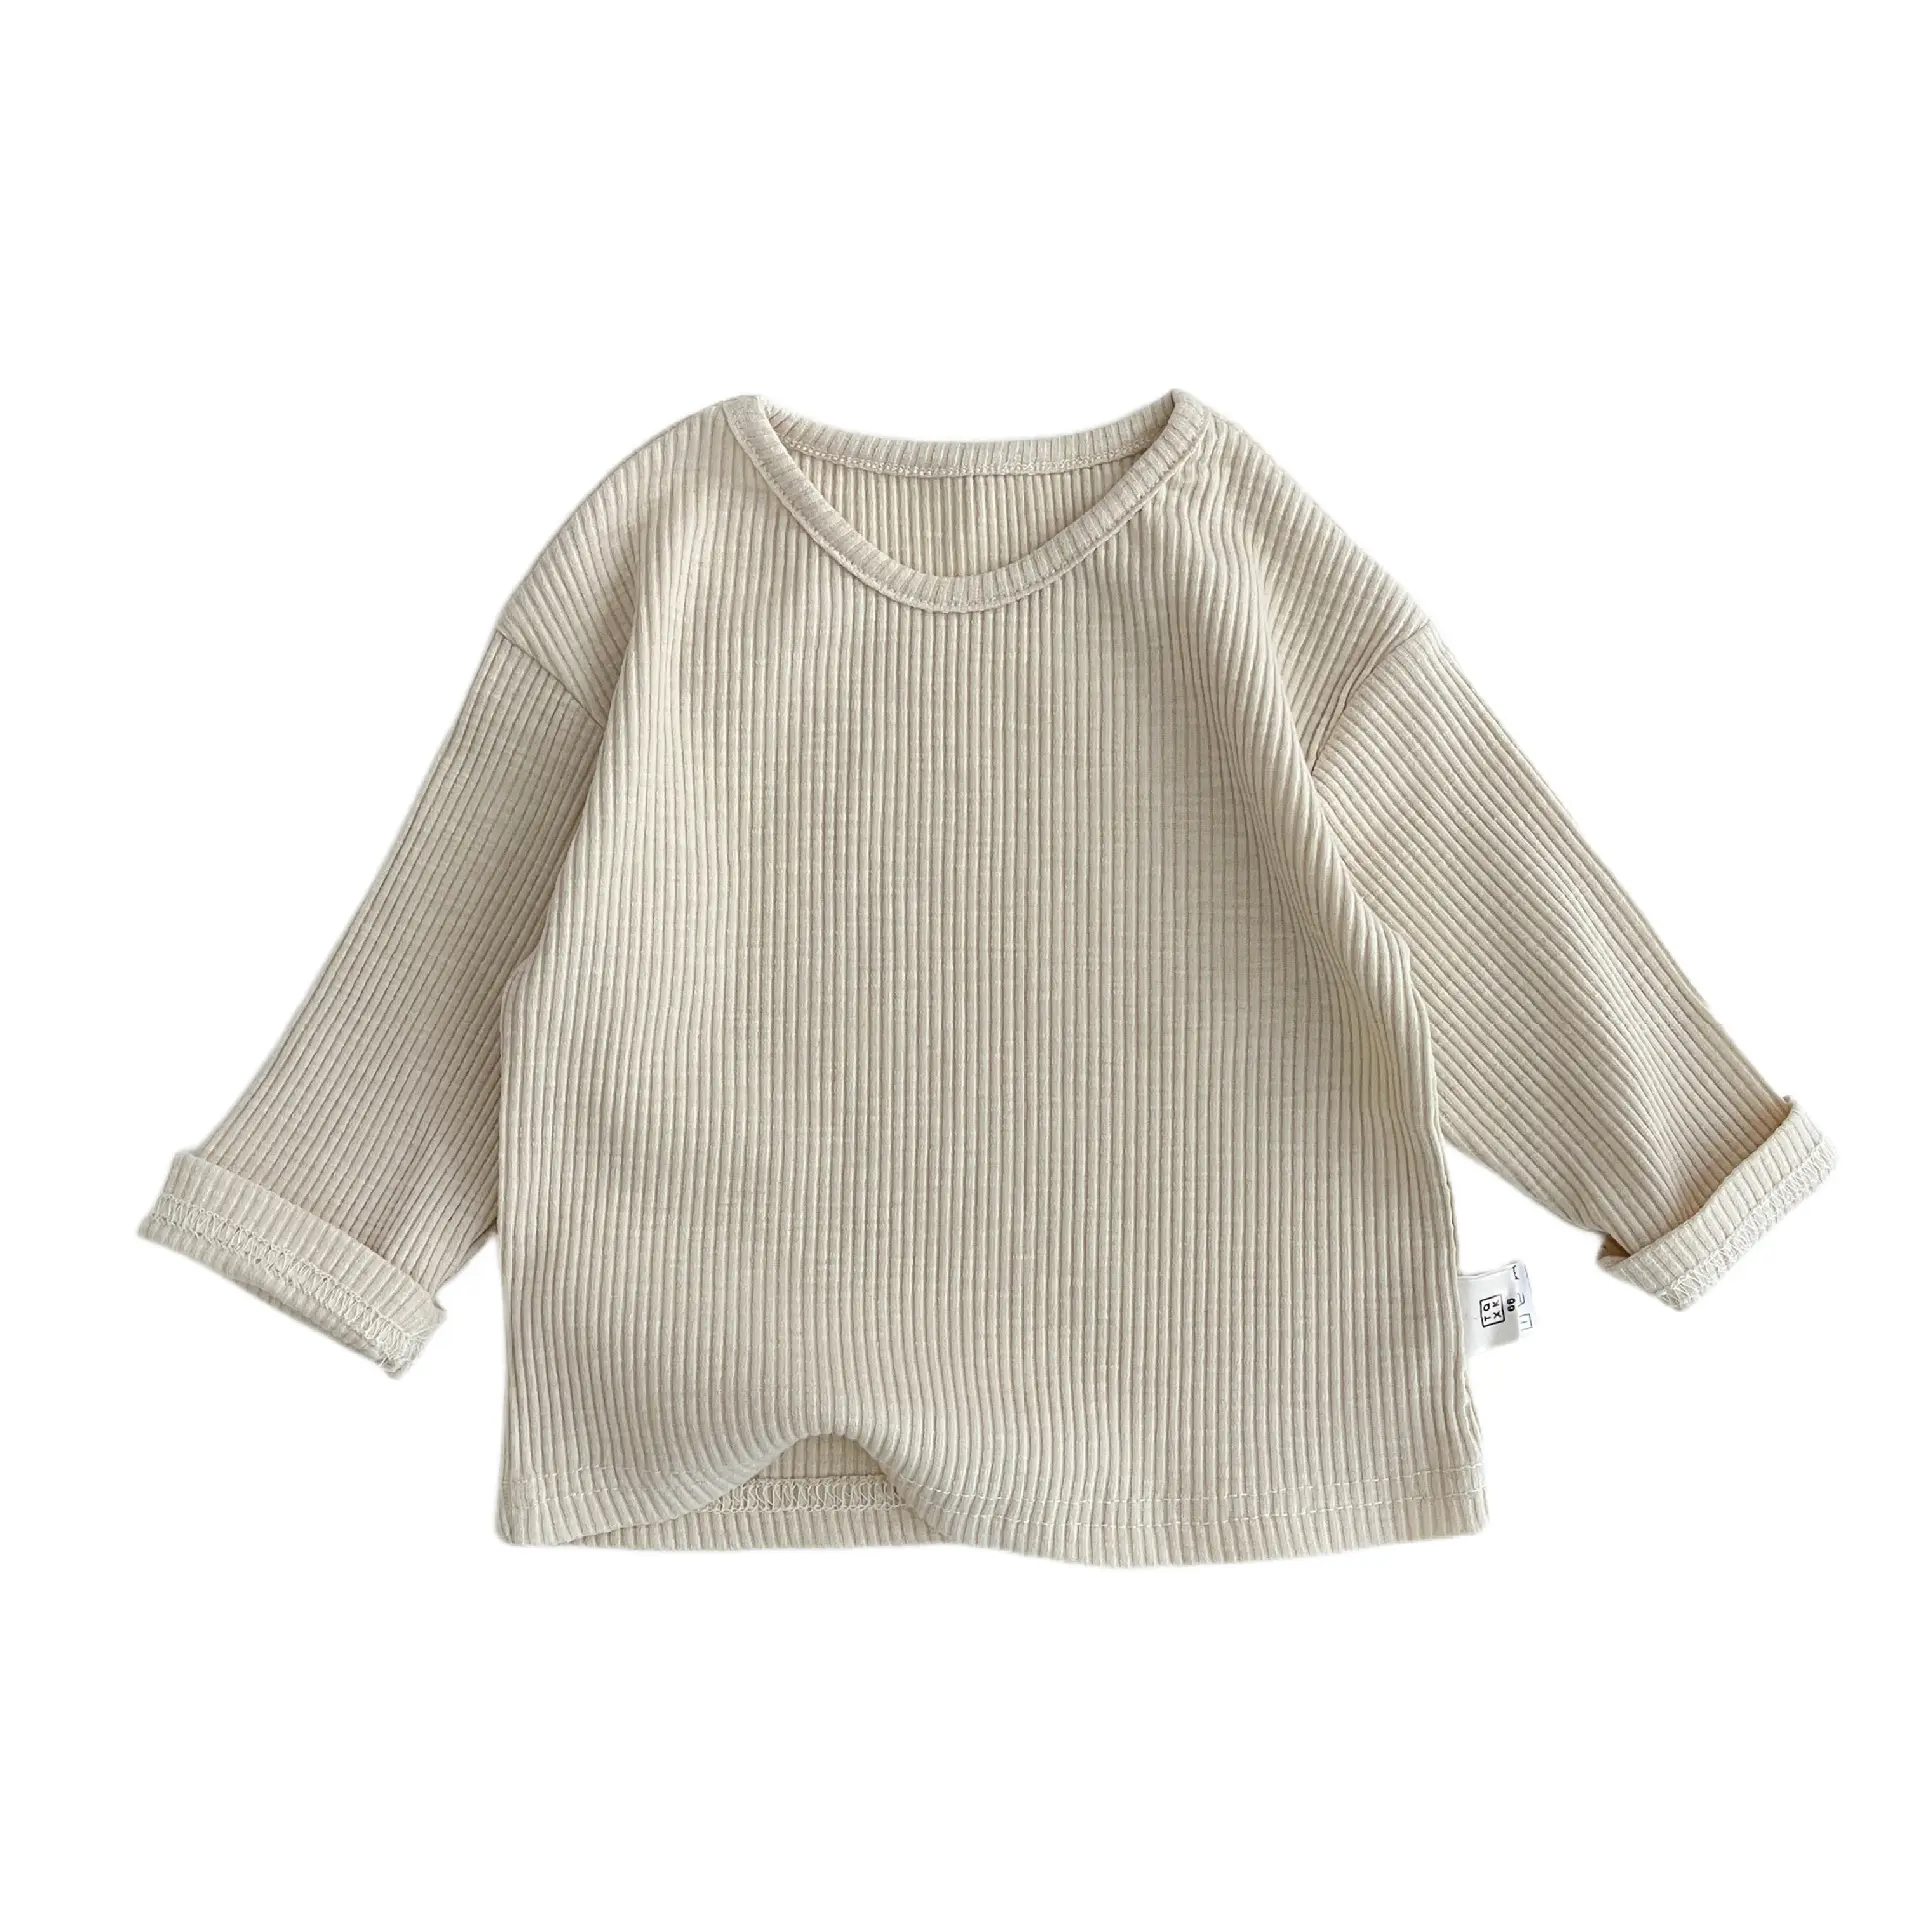 Autumn and Winter Striped Long Sleeve T-shirt for Baby Cotton Baby Bottoming Shirt Cute Tops Soft Children's Clothing